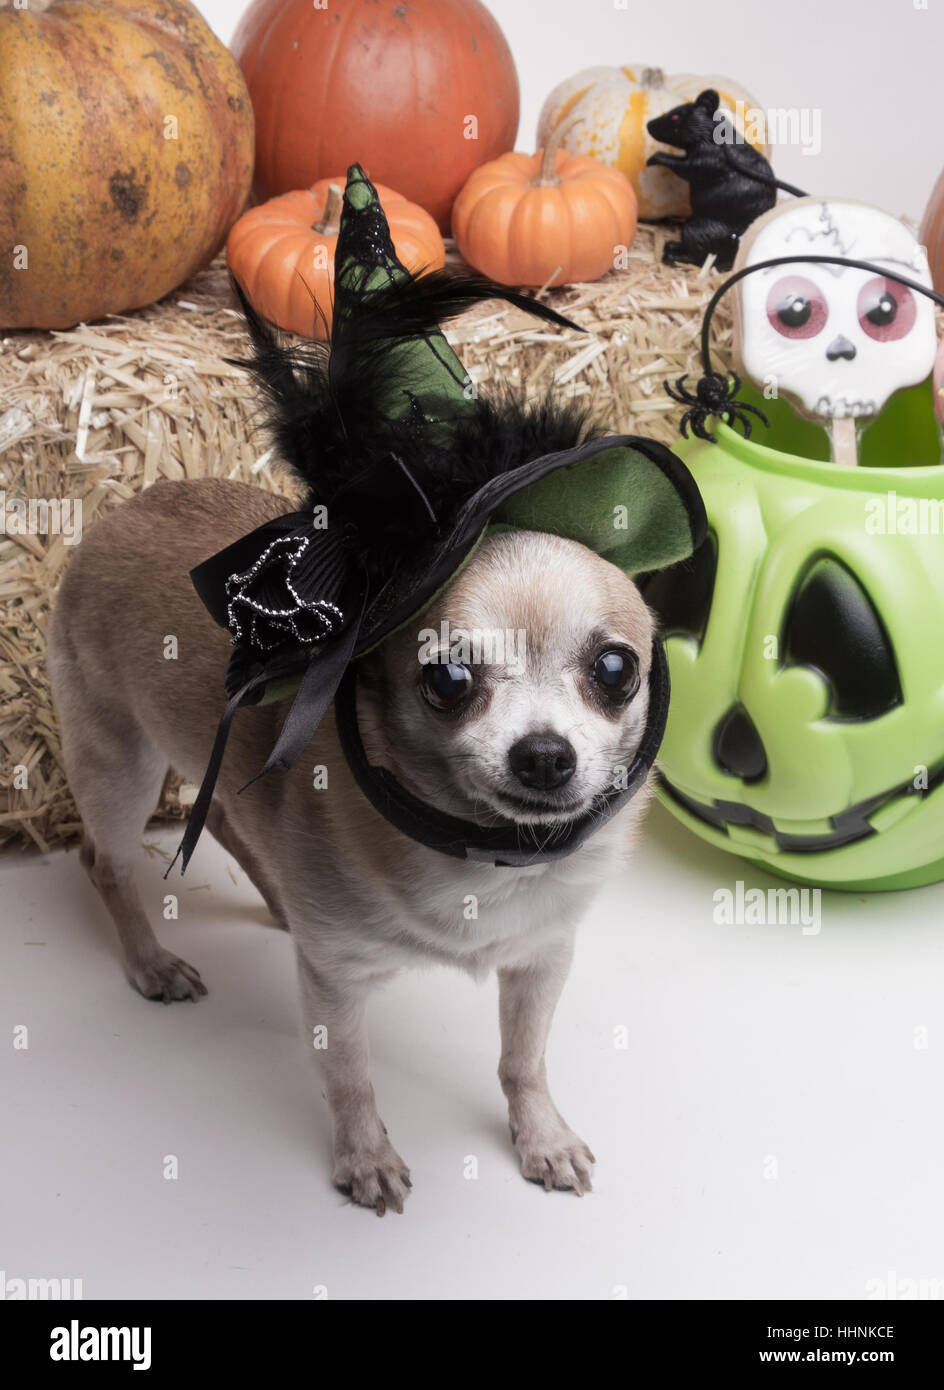 green, hat, dog, dogs, silly, puppy, halloween, costume, pumpkin, funny, brew, Stock Photo